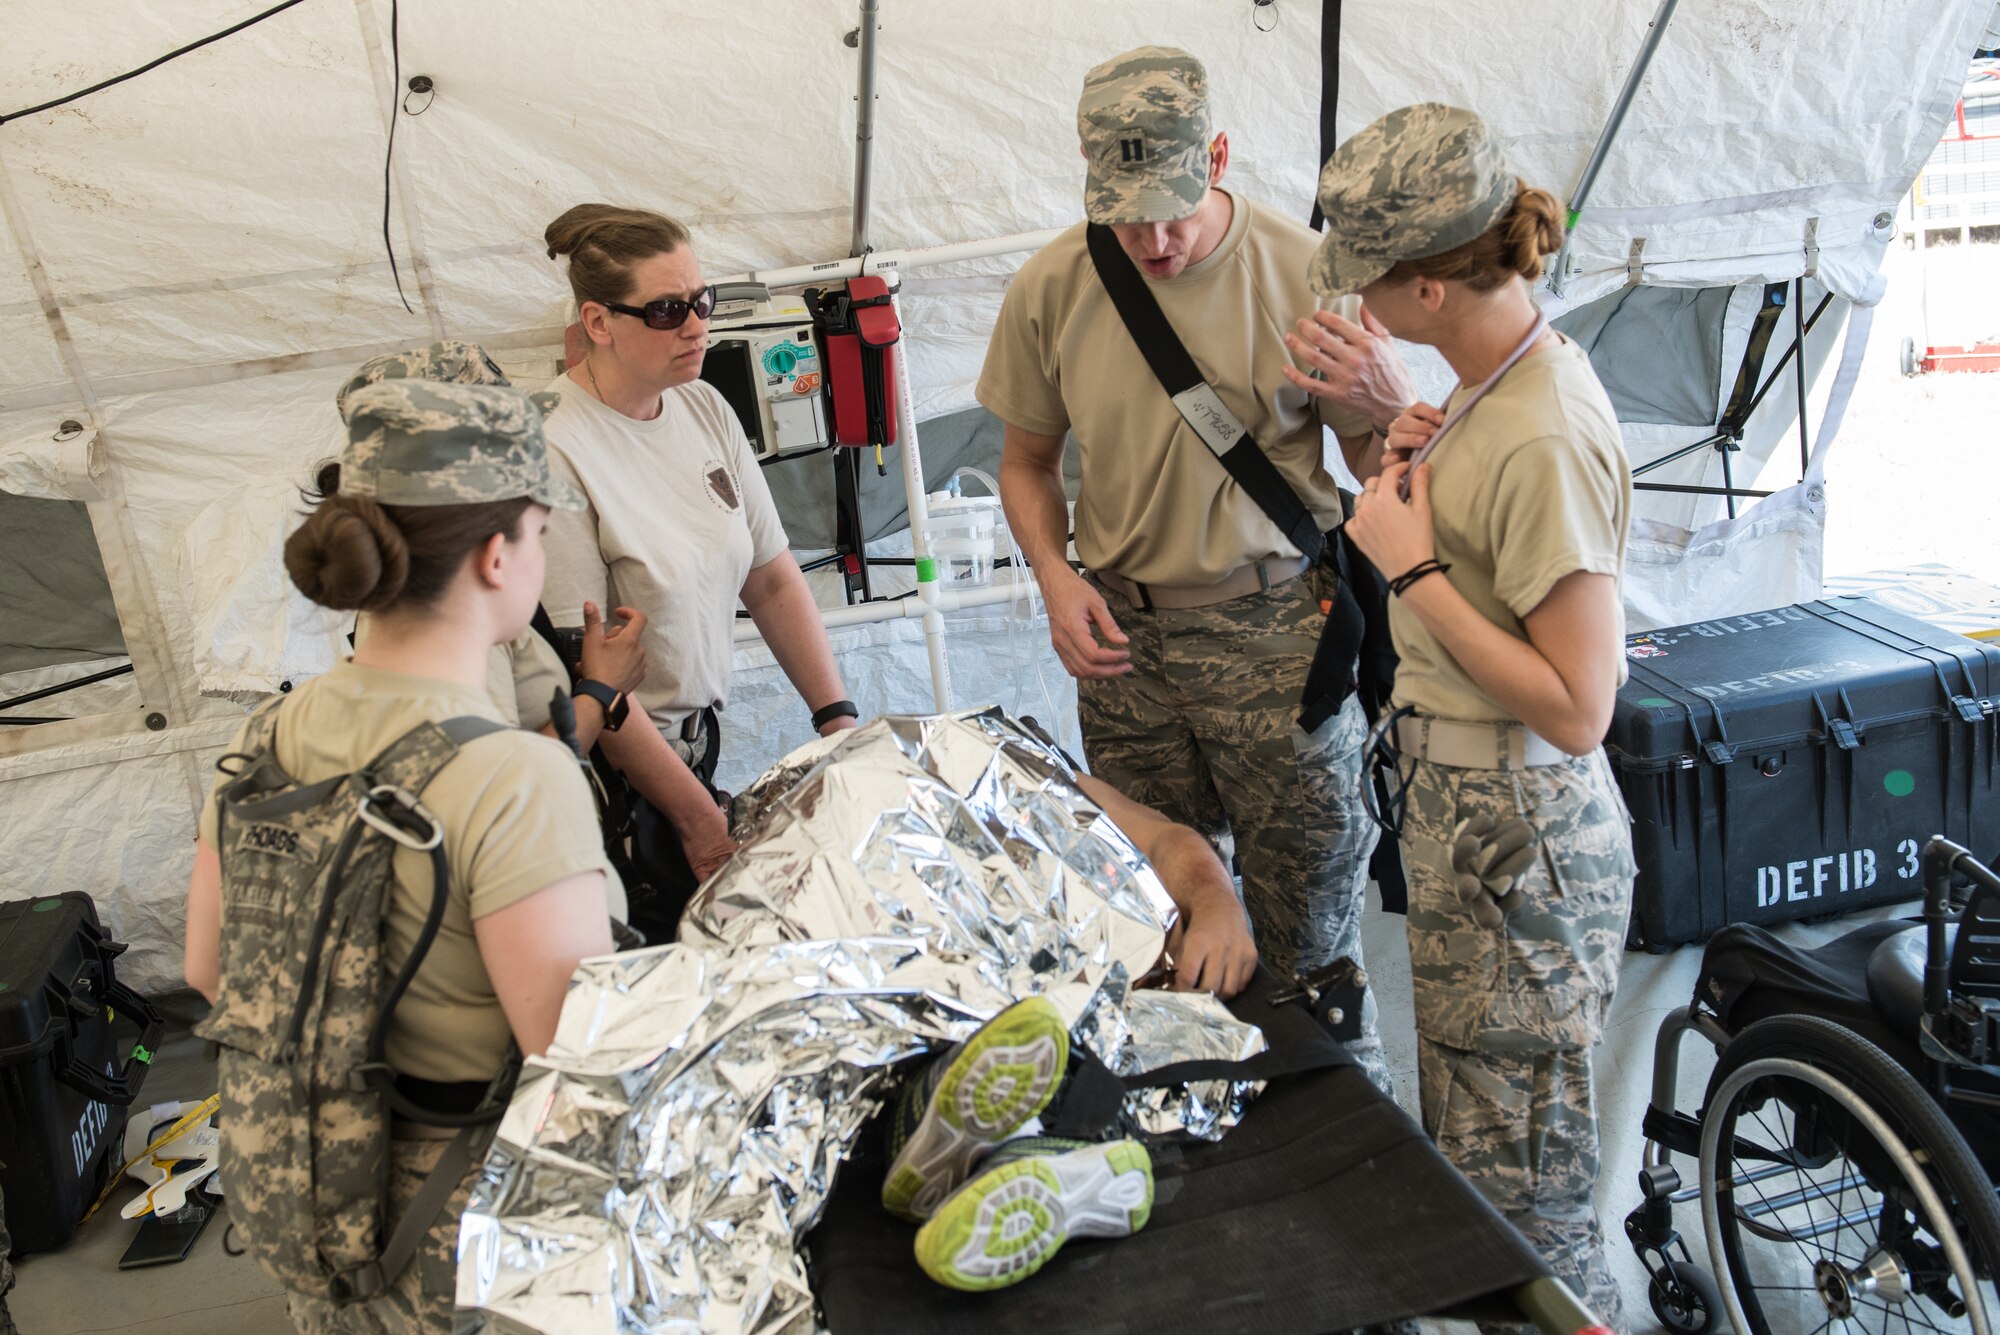 U.S. Airmen with the 193rd Special Operations Medical Group Detachment 1, Pennsylvania Air National Guard, discuss the treatment of casualty actor during exercise Vigilant Guard.